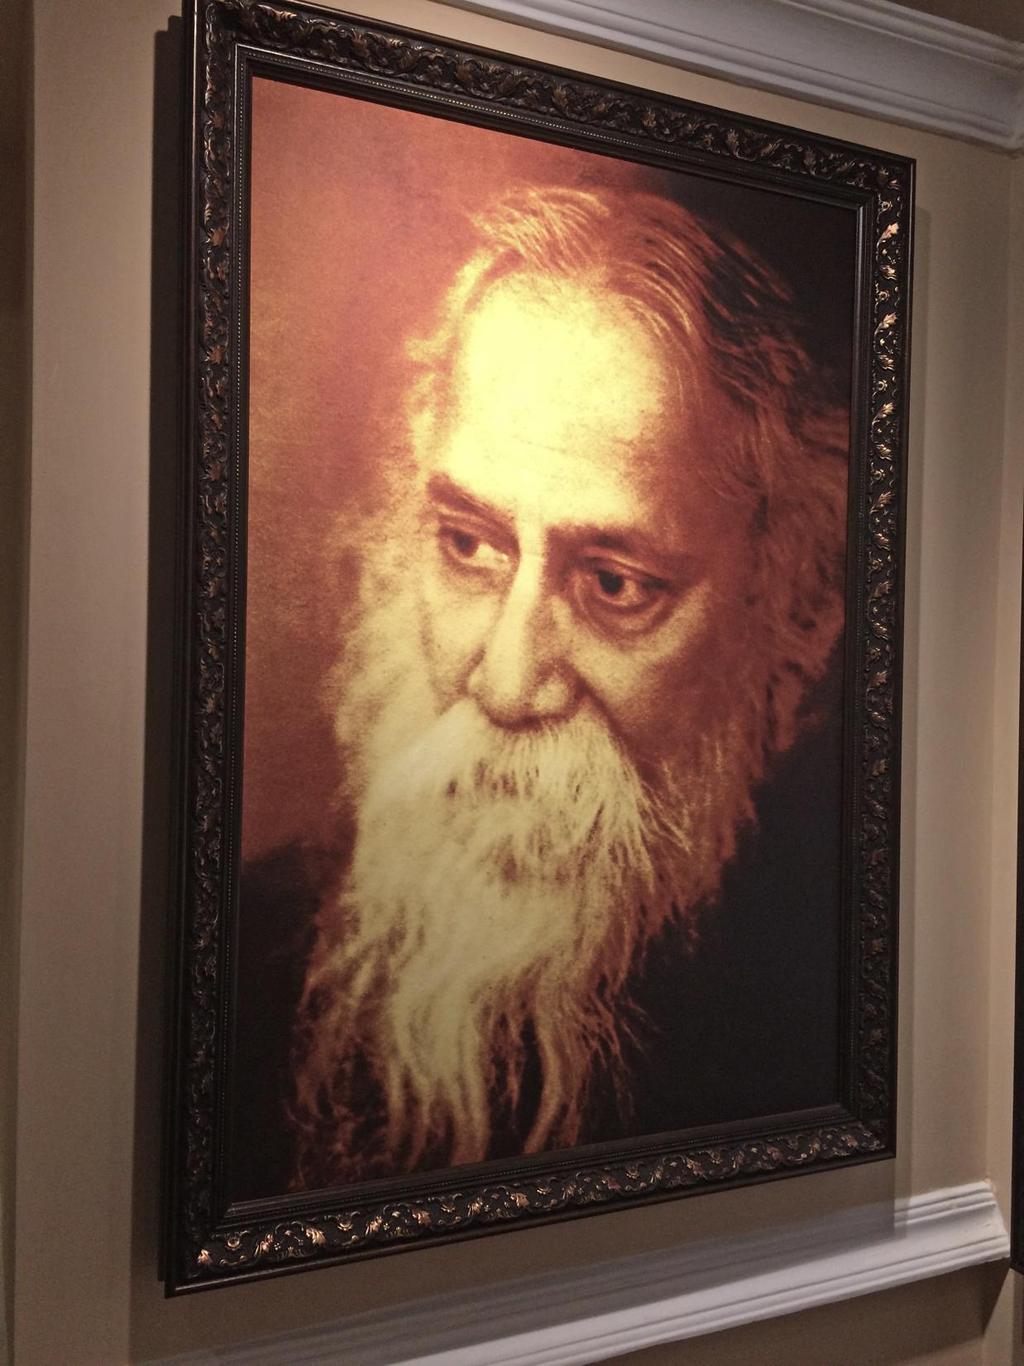 In Tagore s view, the higher aim of education was the same as that of a person s life, that is, to